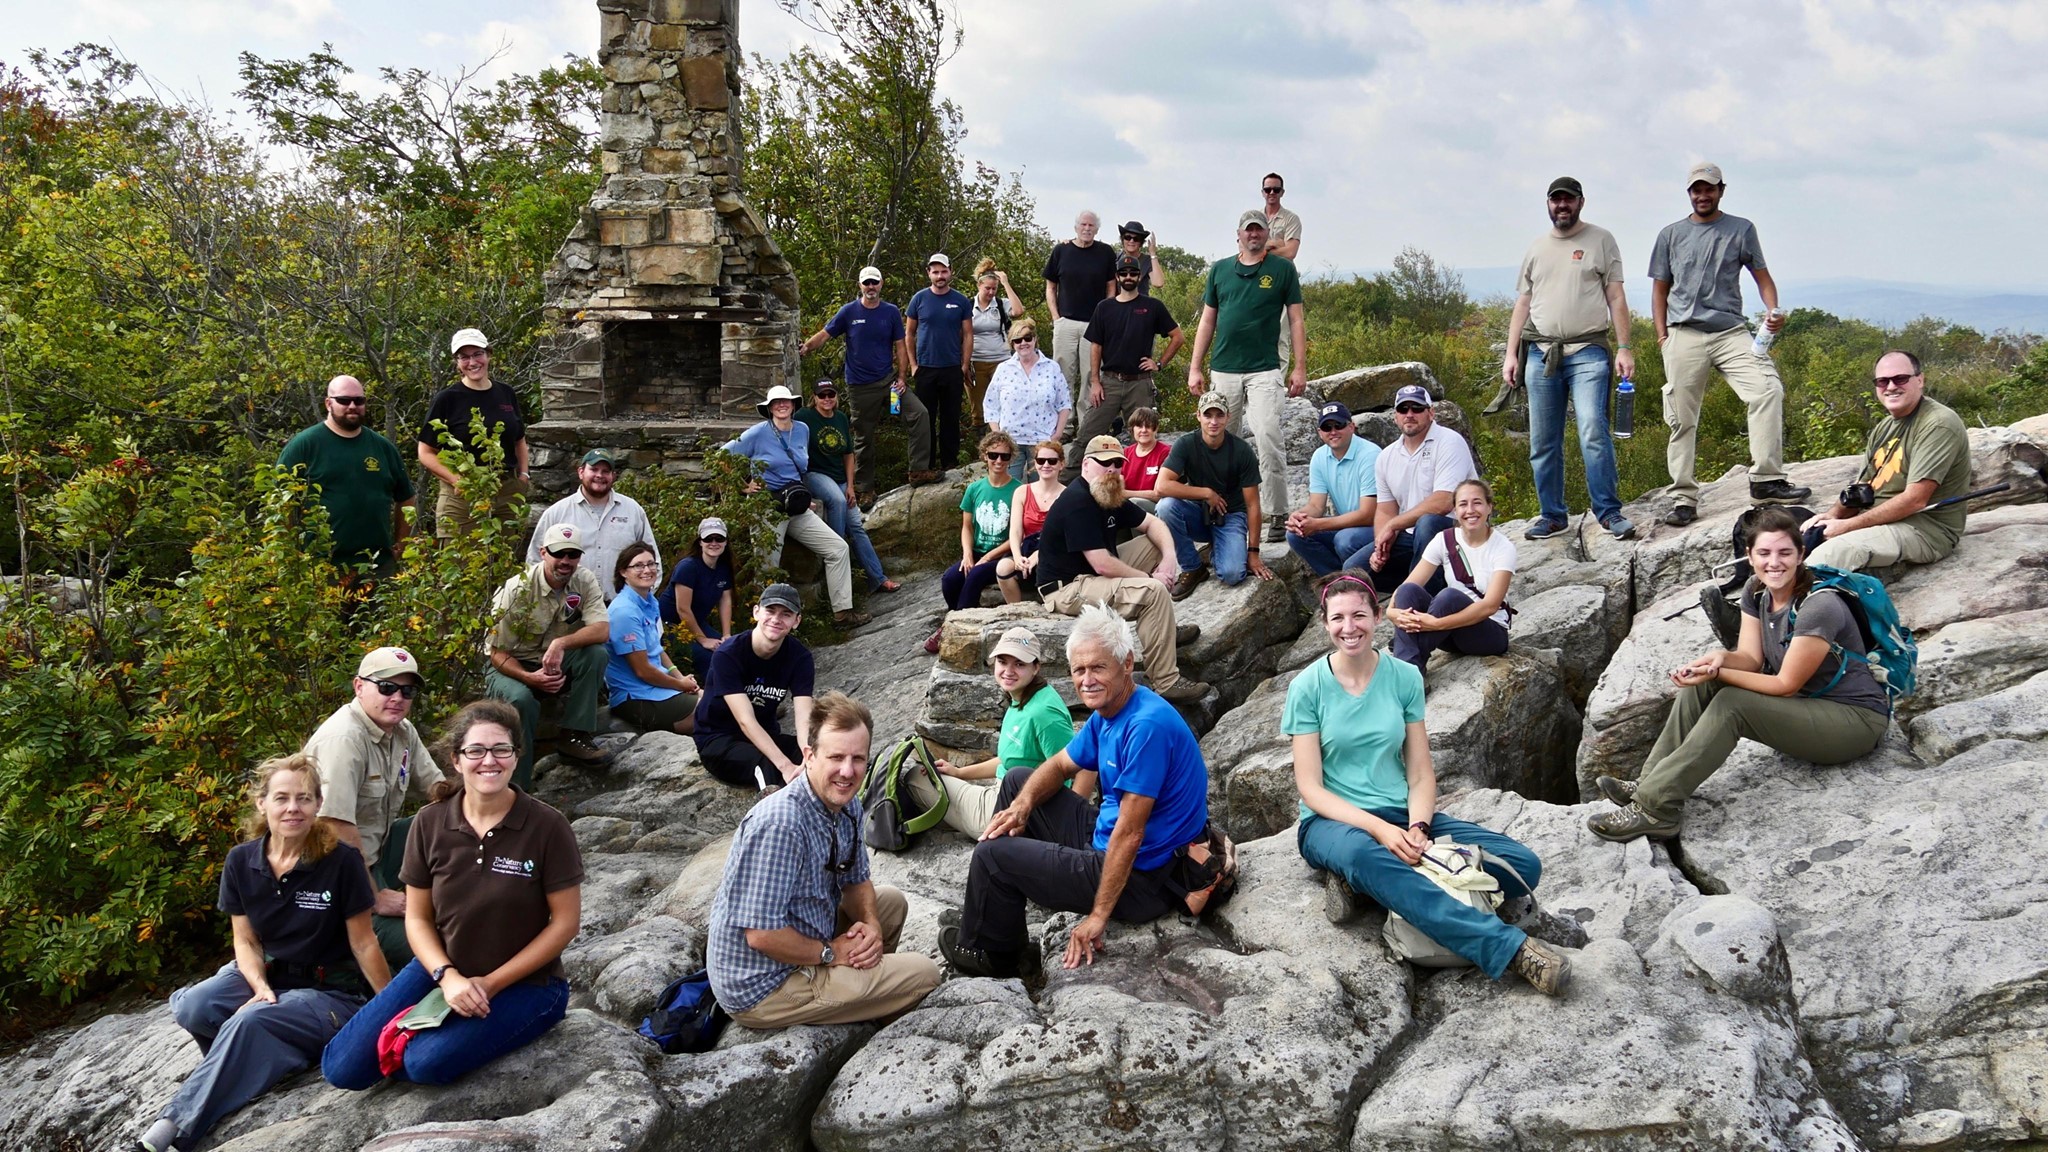 A large group of people pose while standing and sitting on an outcropping of rock.